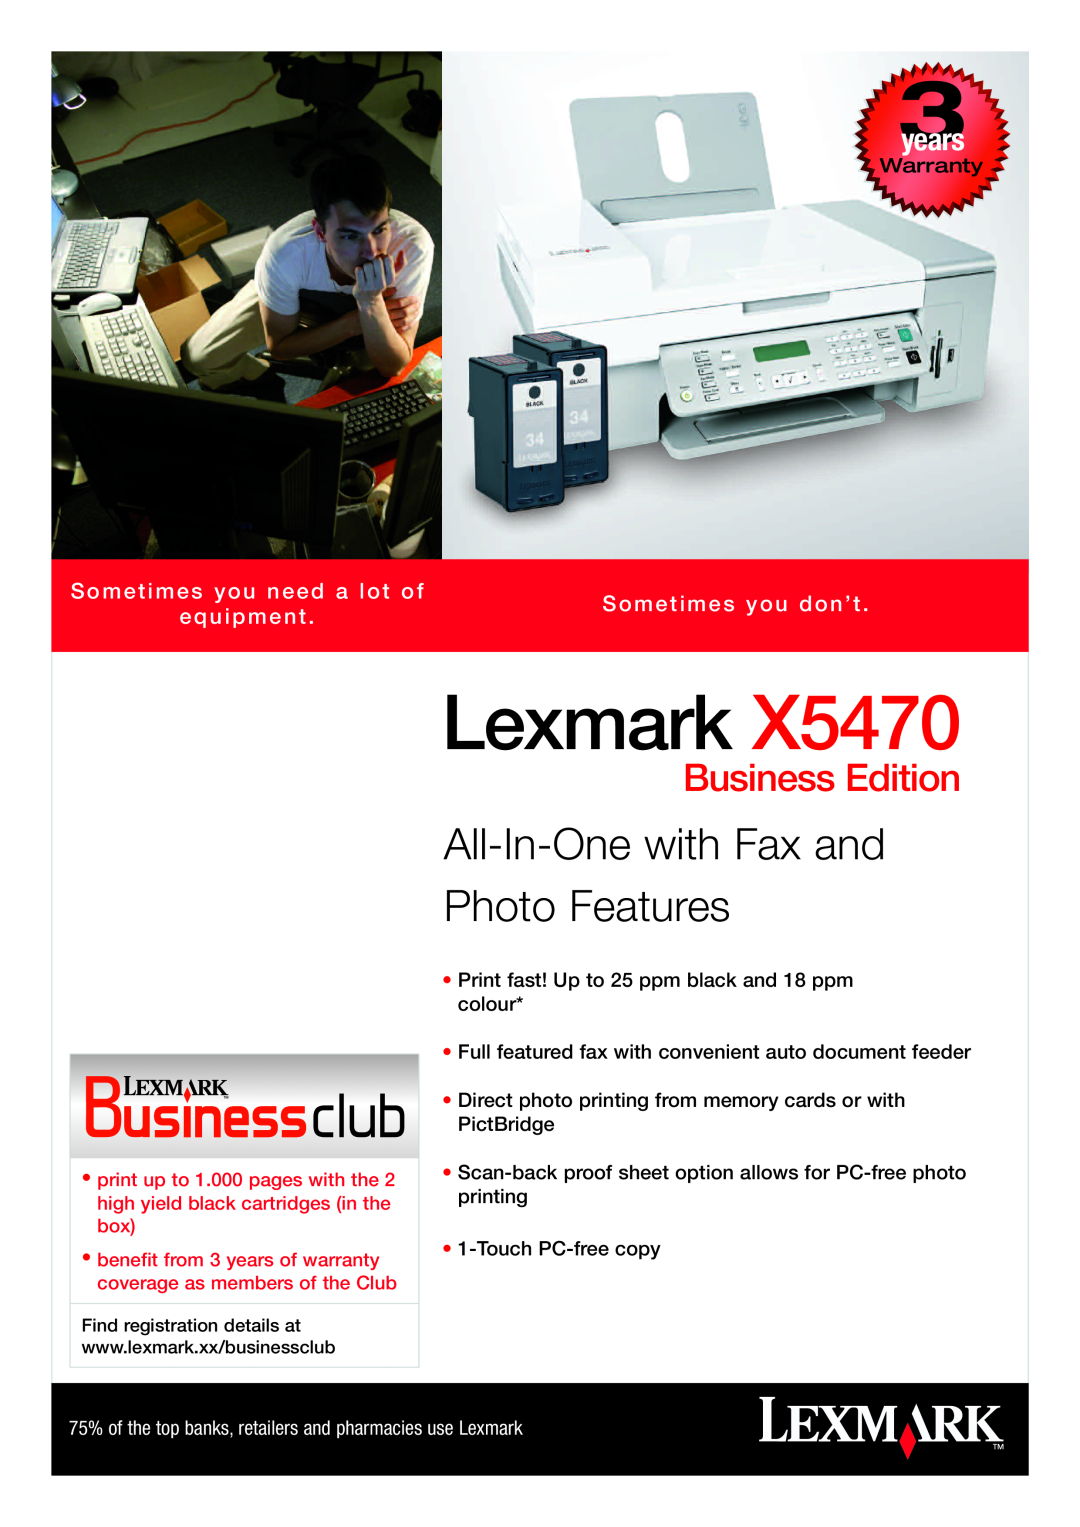 Lexmark X5470 warranty Business Edition, 75% of the top banks, retailers and pharmacies use Lexmark, years, equipment 